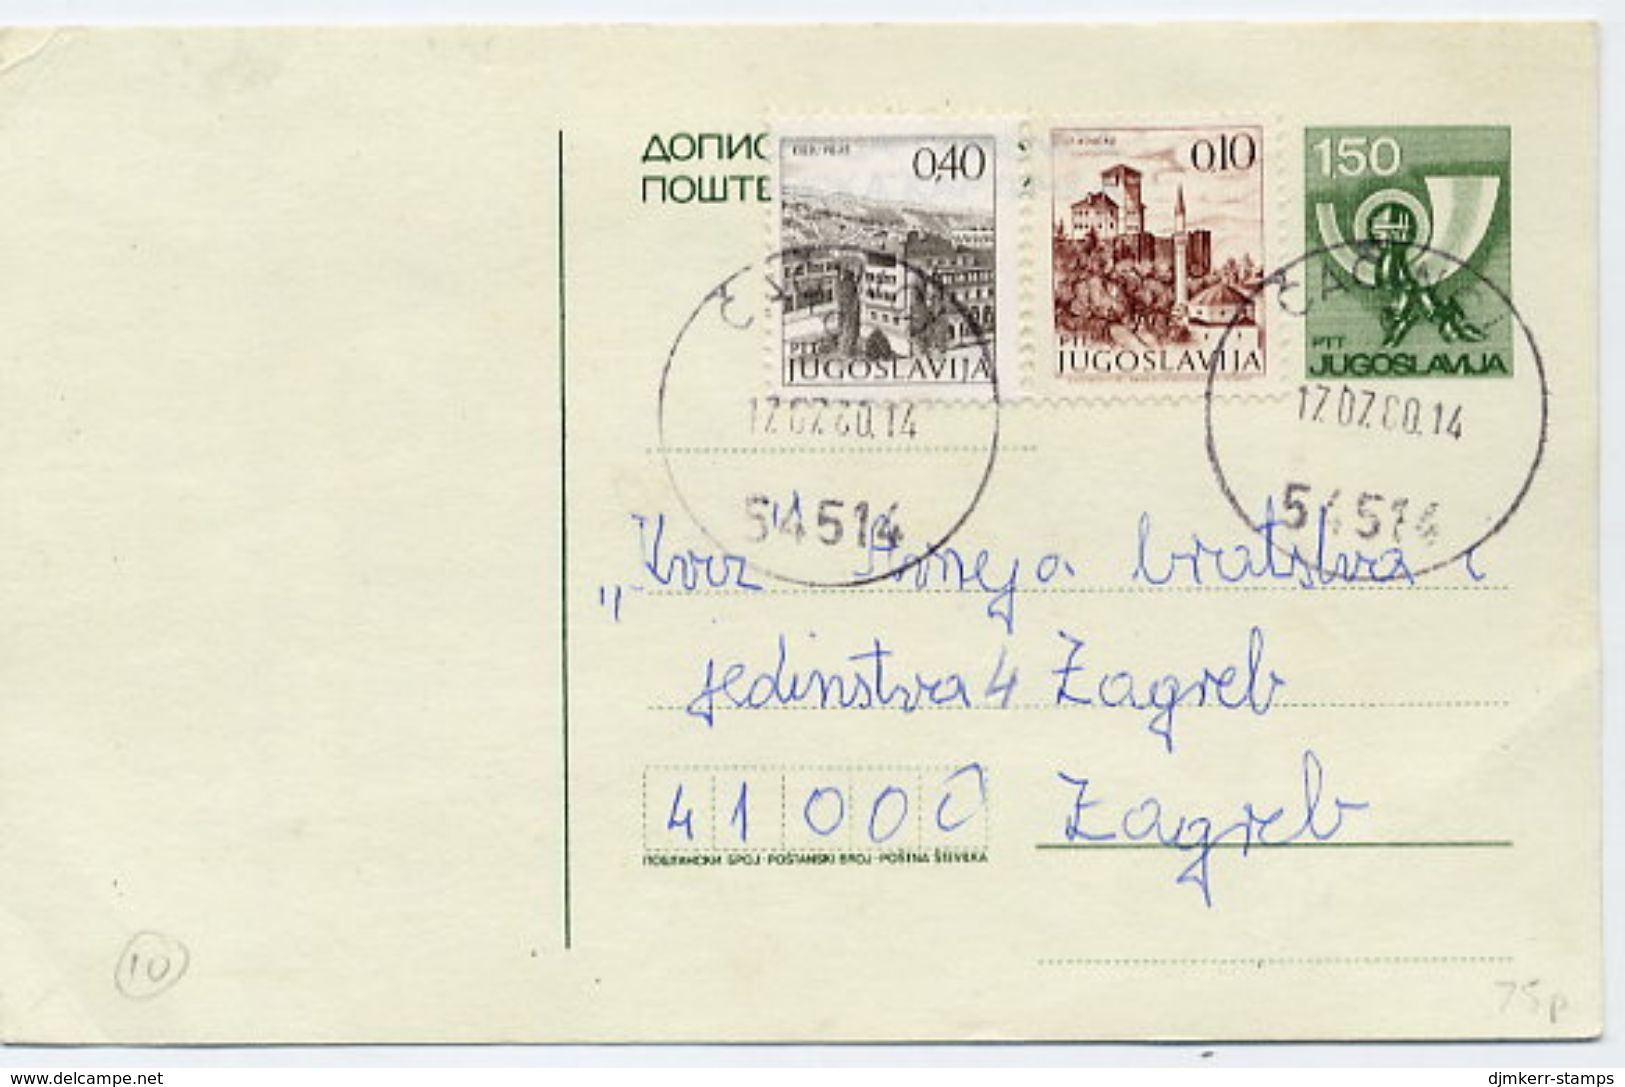 YUGOSLAVIA 1978 Posthorn 1.50 D. Stationery Card Used With Additional Franking  Michel  P179 - Interi Postali